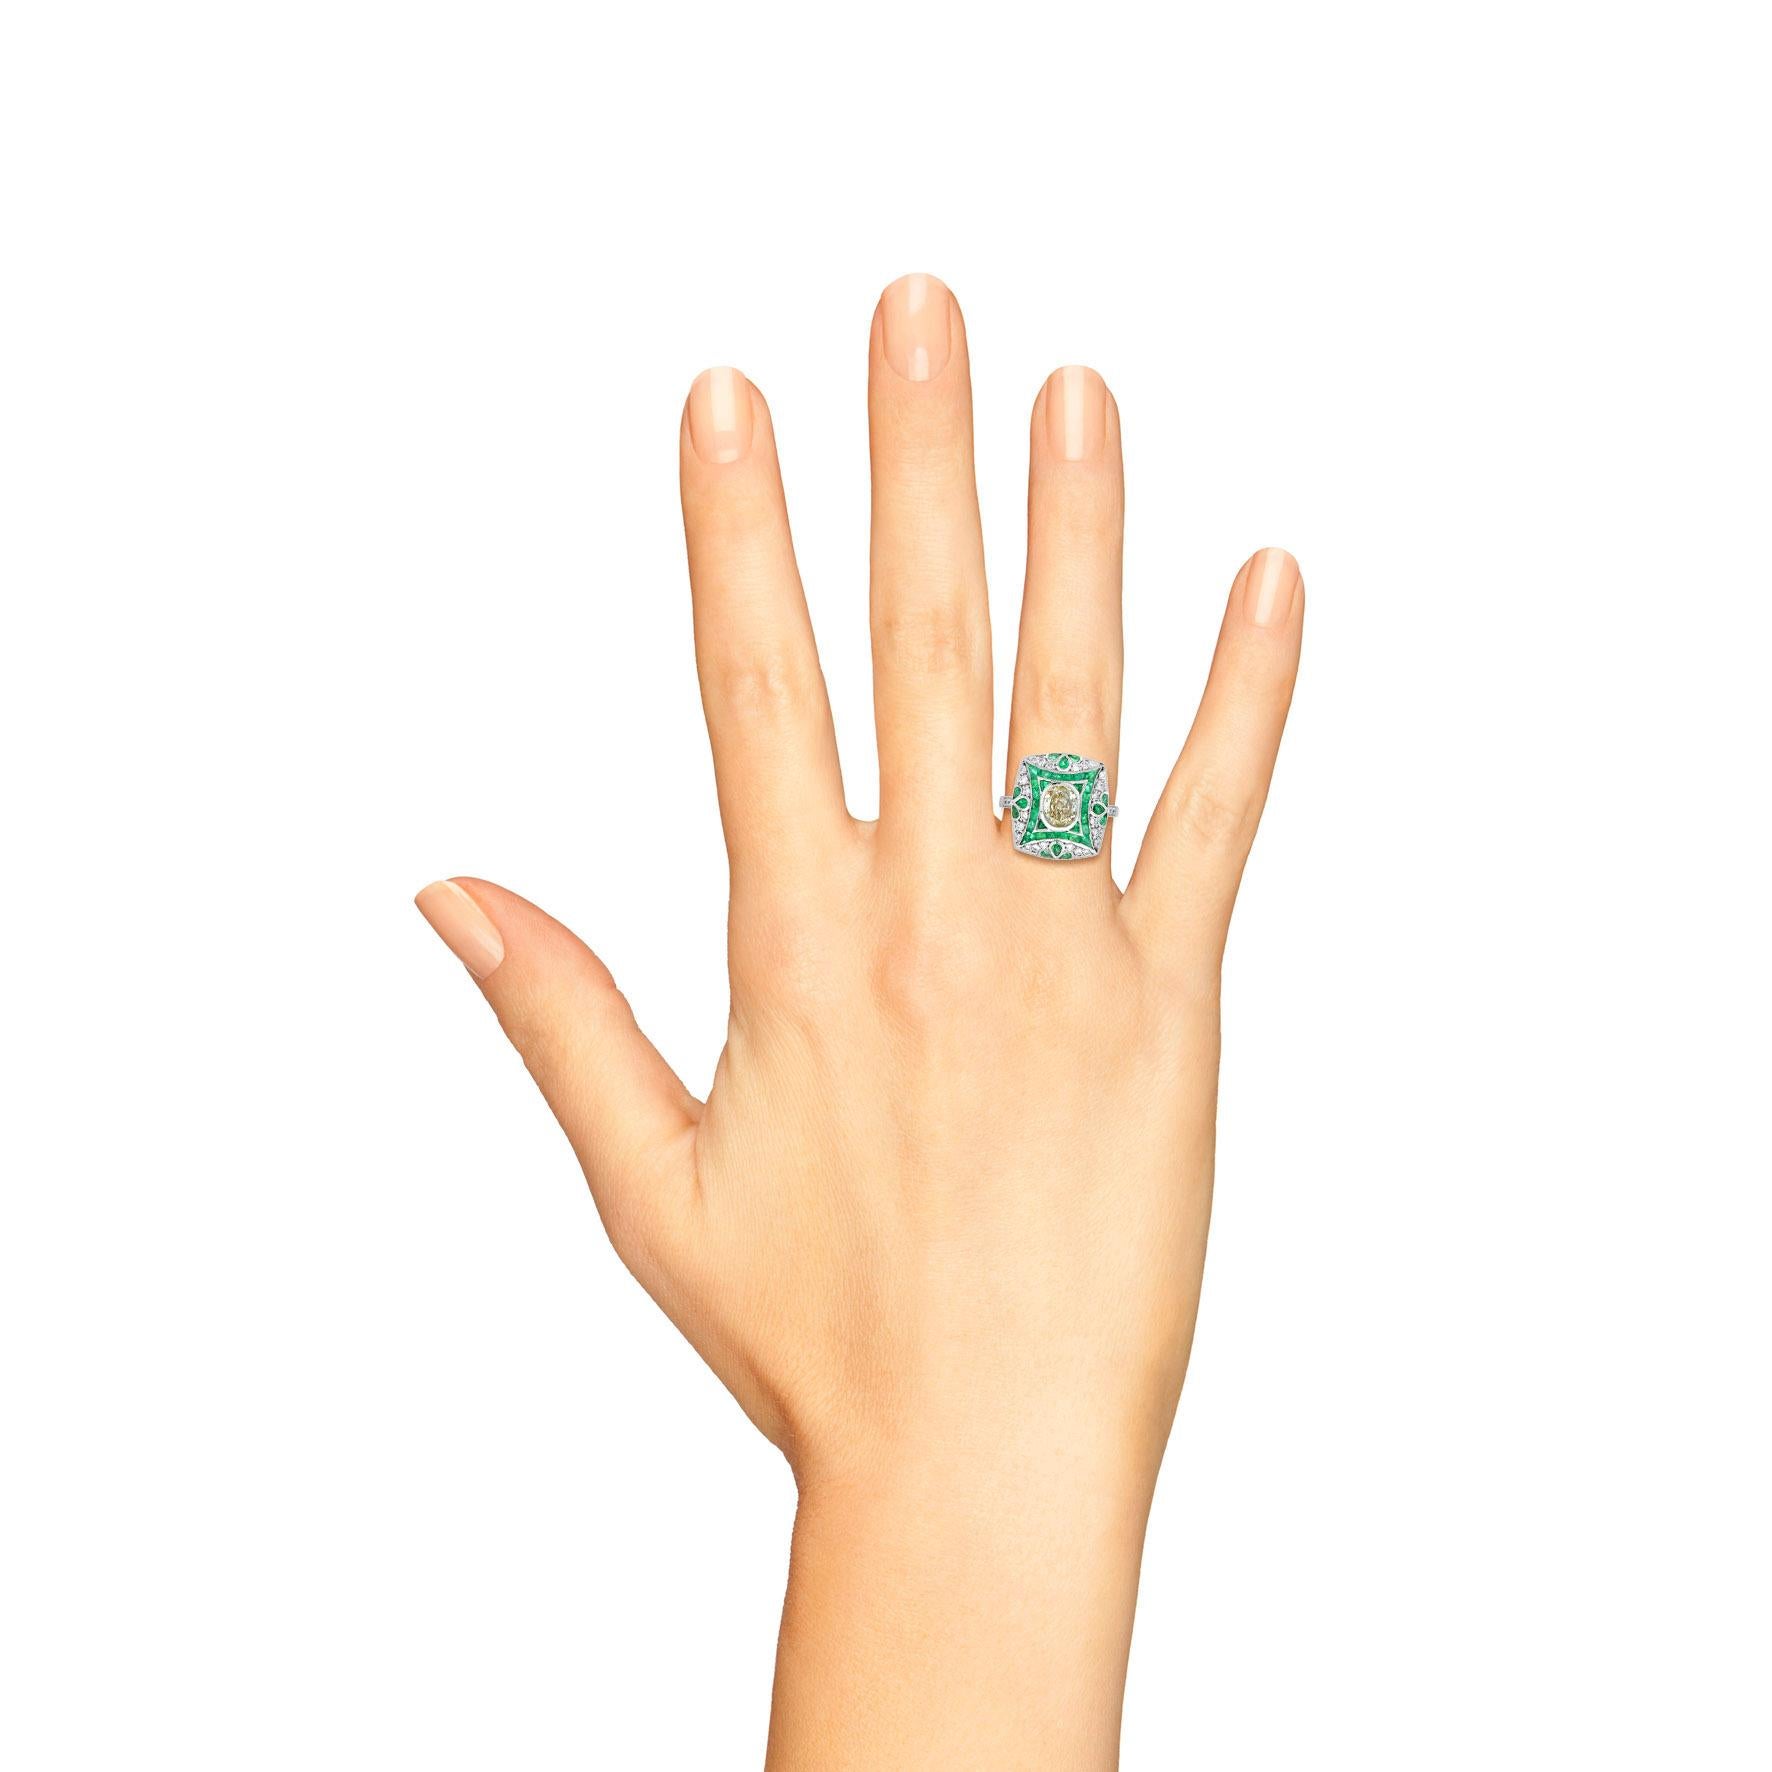 Certified Diamond and Emerald Art Deco Style Engagement Ring in 18k White Gold For Sale 3